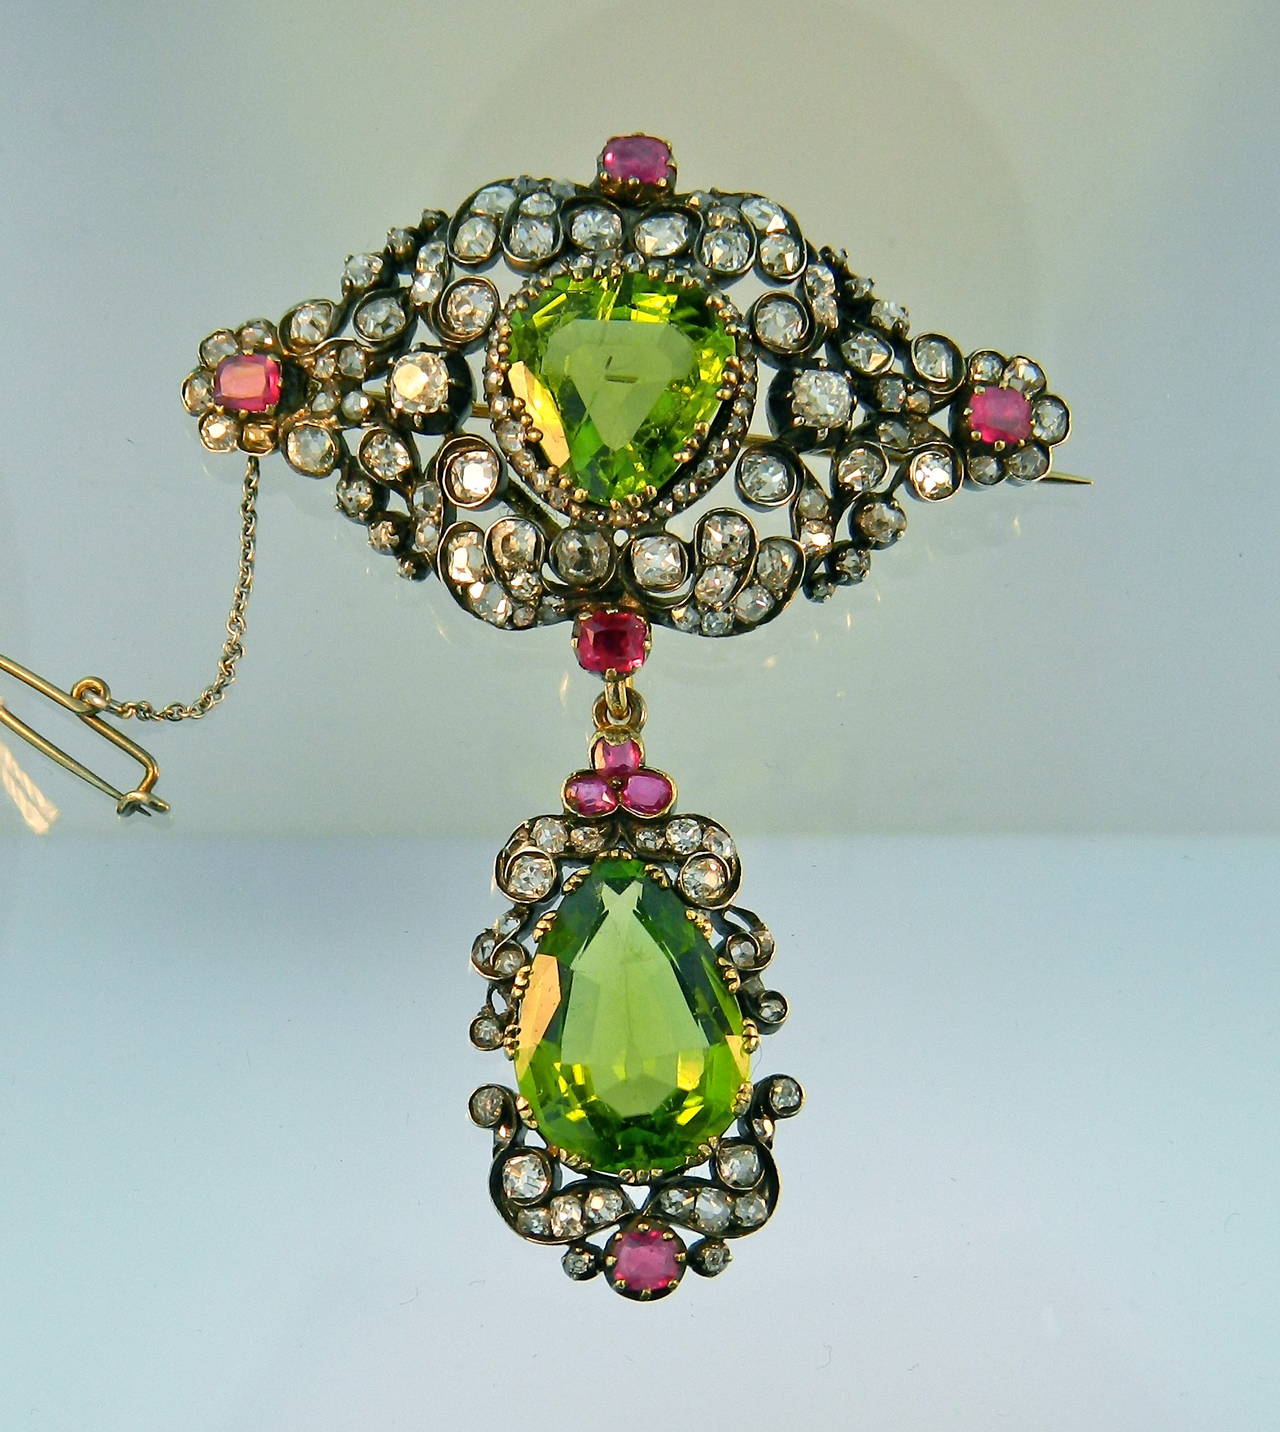 Mid Victorian Peridot Burma Ruby Diamond Corsage Brooch

Rare and superb example of Victorian 1850's jewels